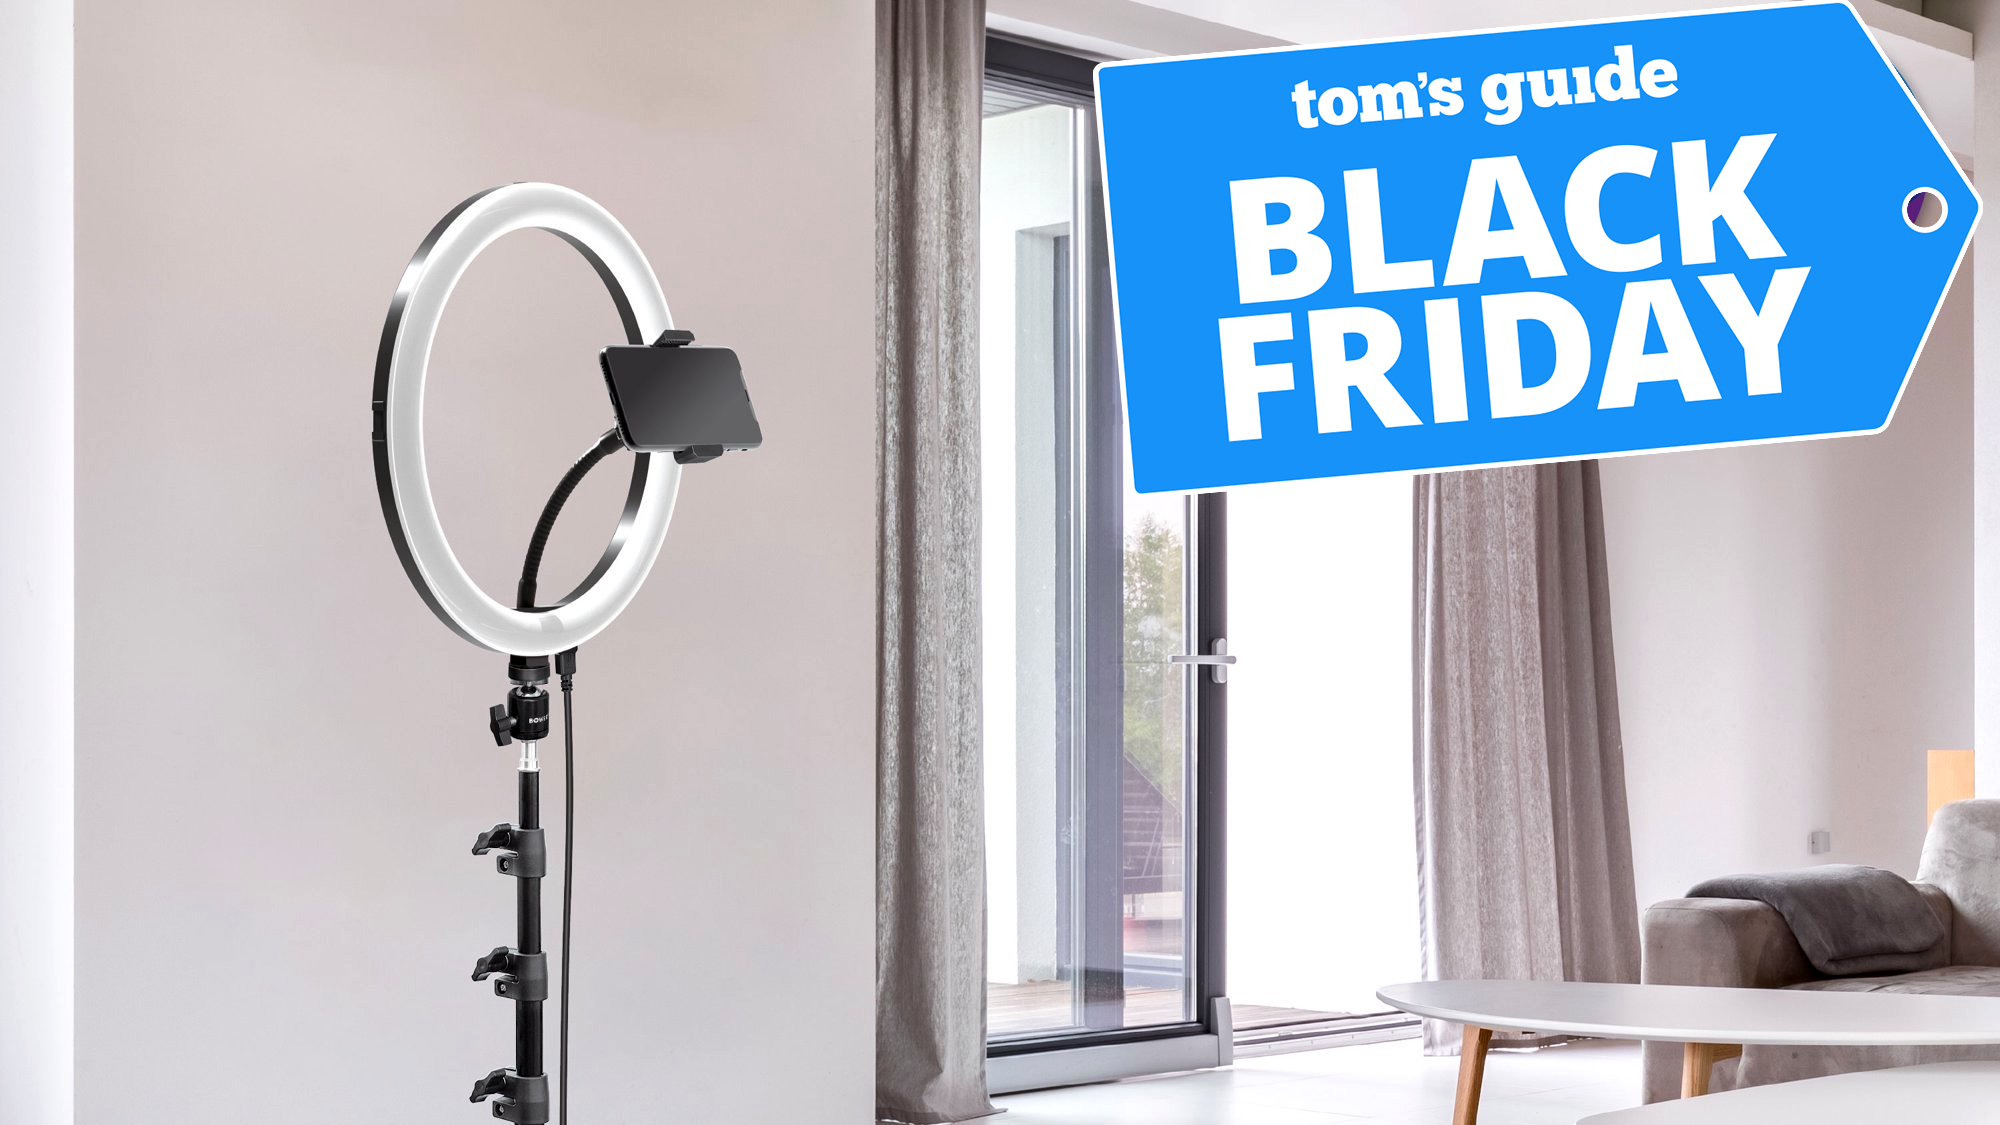 Bower 12-inch ring light promo image with black friday deal tag superimposed